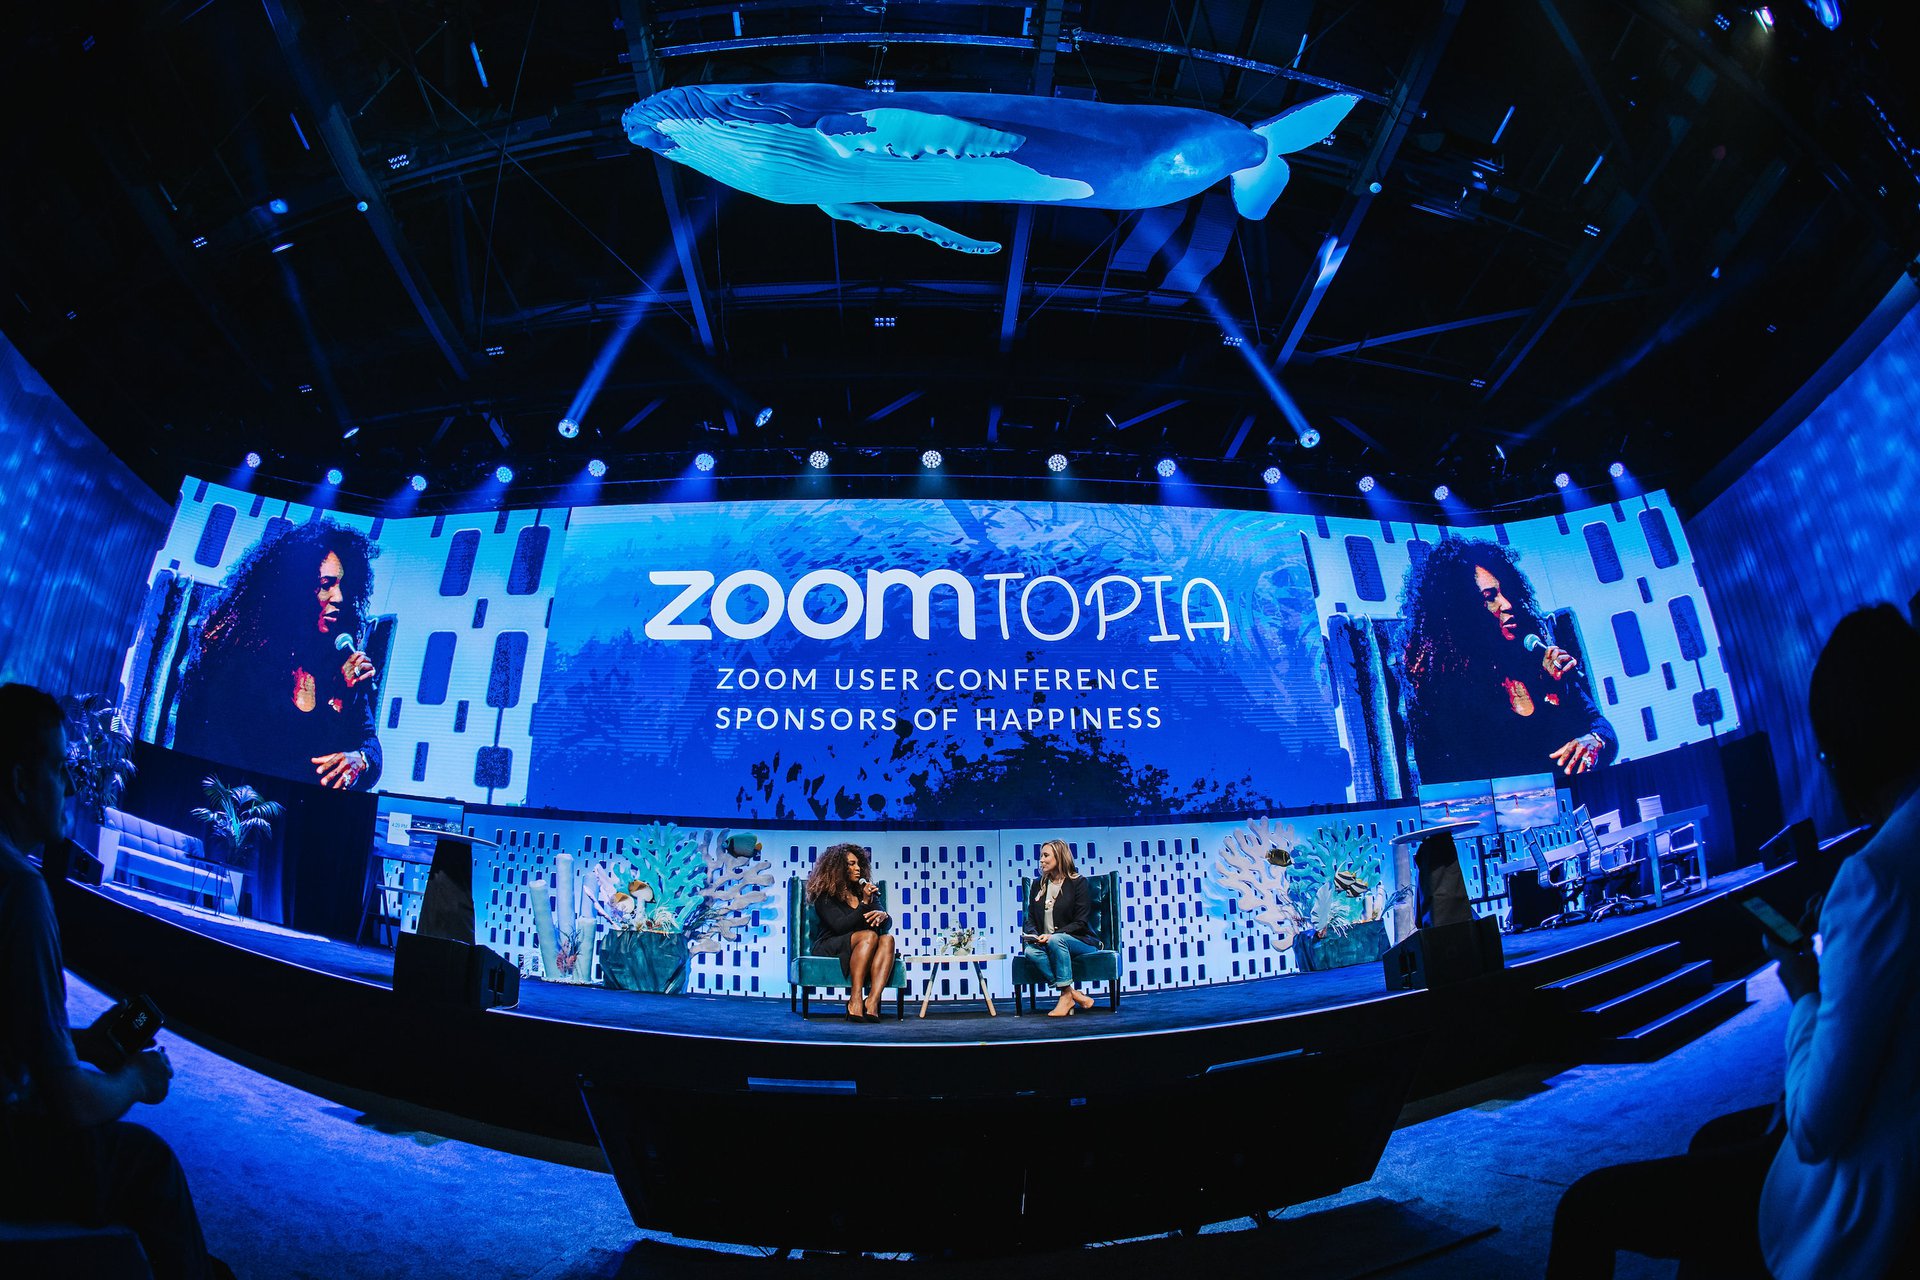 Serena Williams on stage at the Zoomtopia User Conference 2018